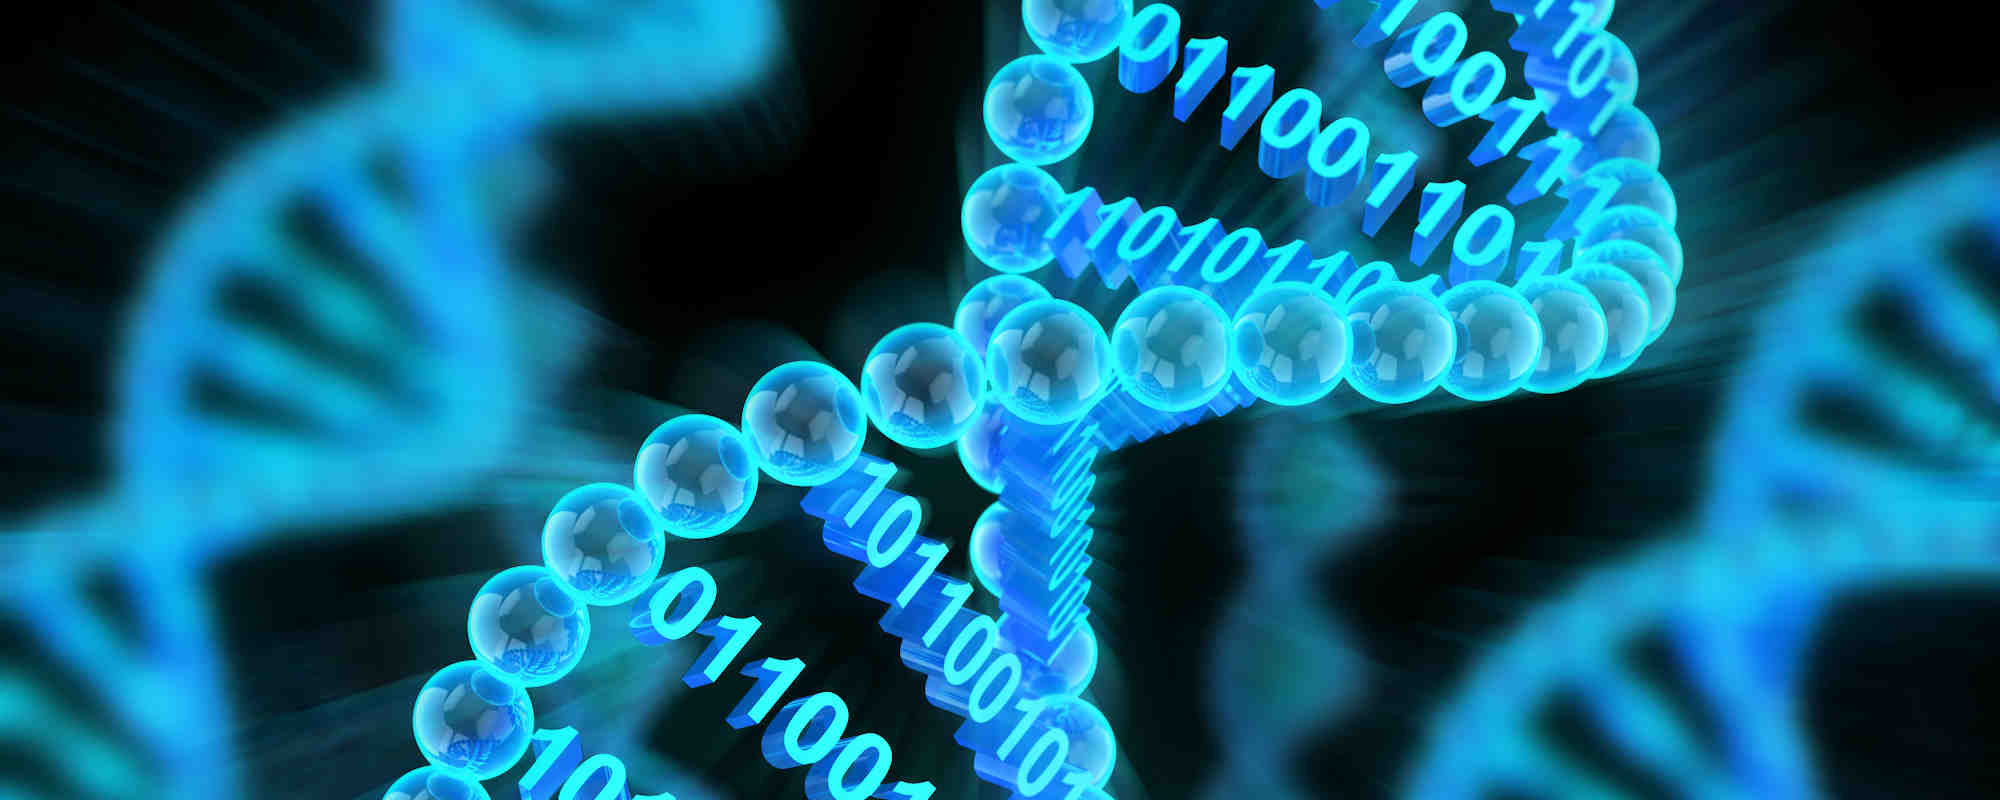 Digital PCR: Details and Emerging Applications of this Incredibly Powerful Molecular Tool